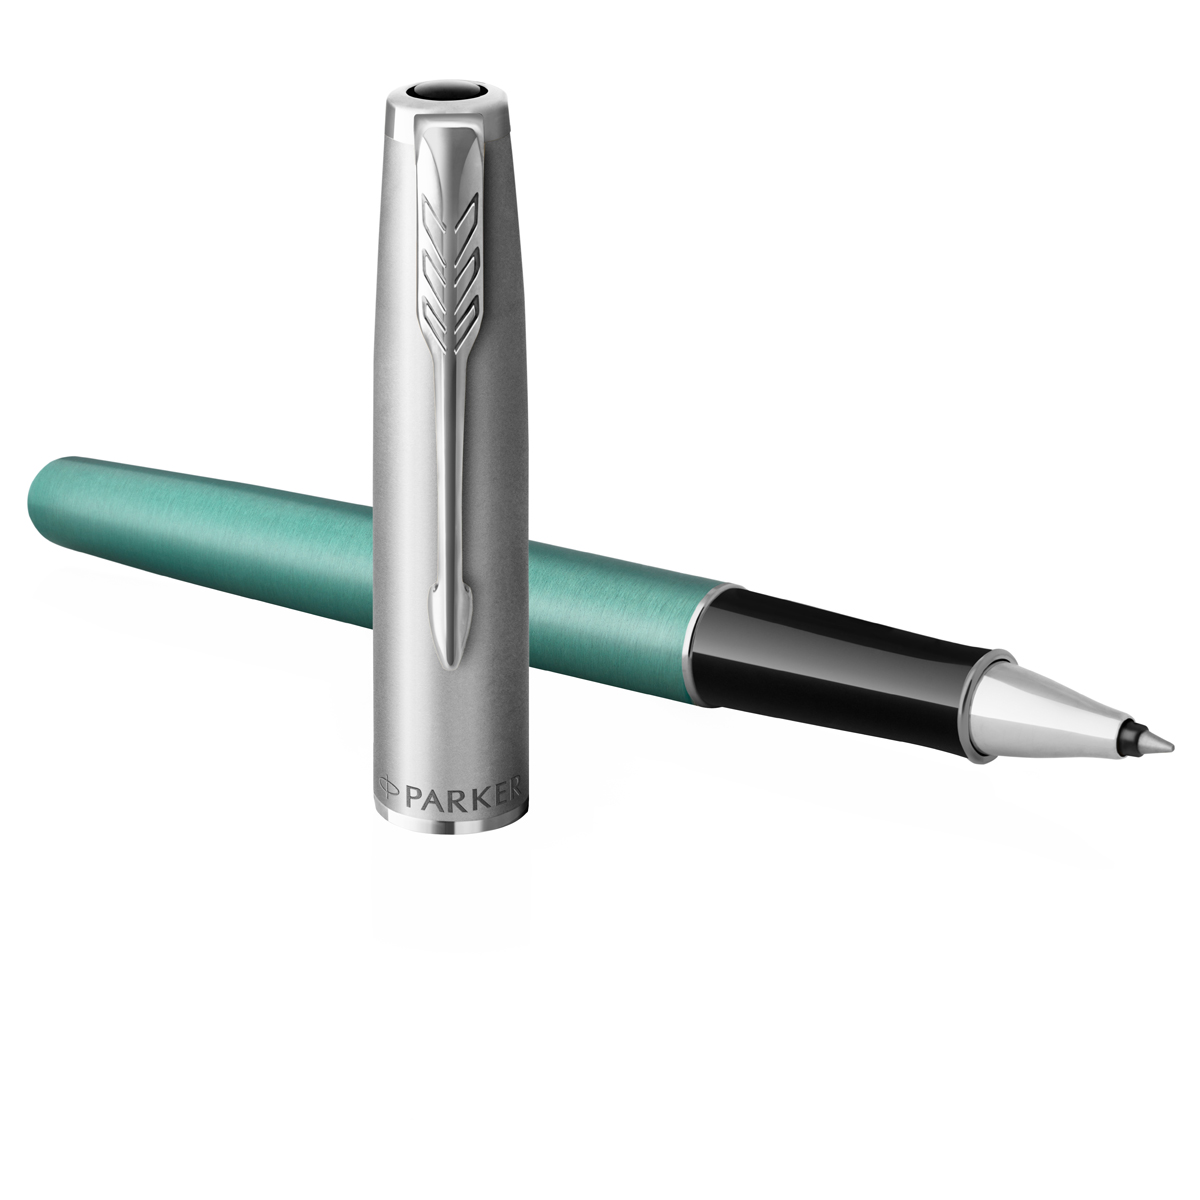 - Parker "Sonnet Sand Blasted Metal&Green Lacquer" , 0,5,   